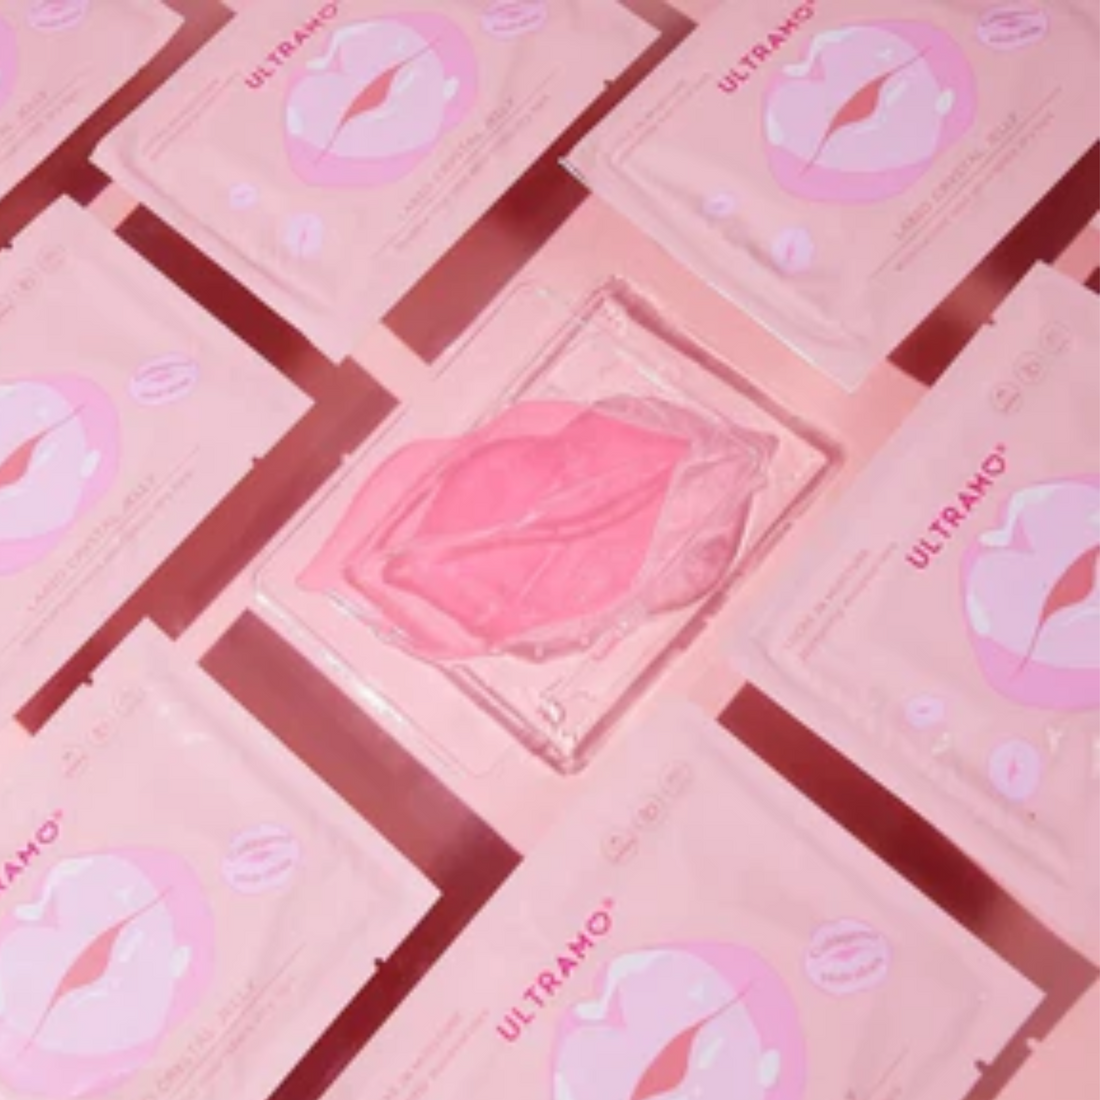 LIP JELLY PATCHES